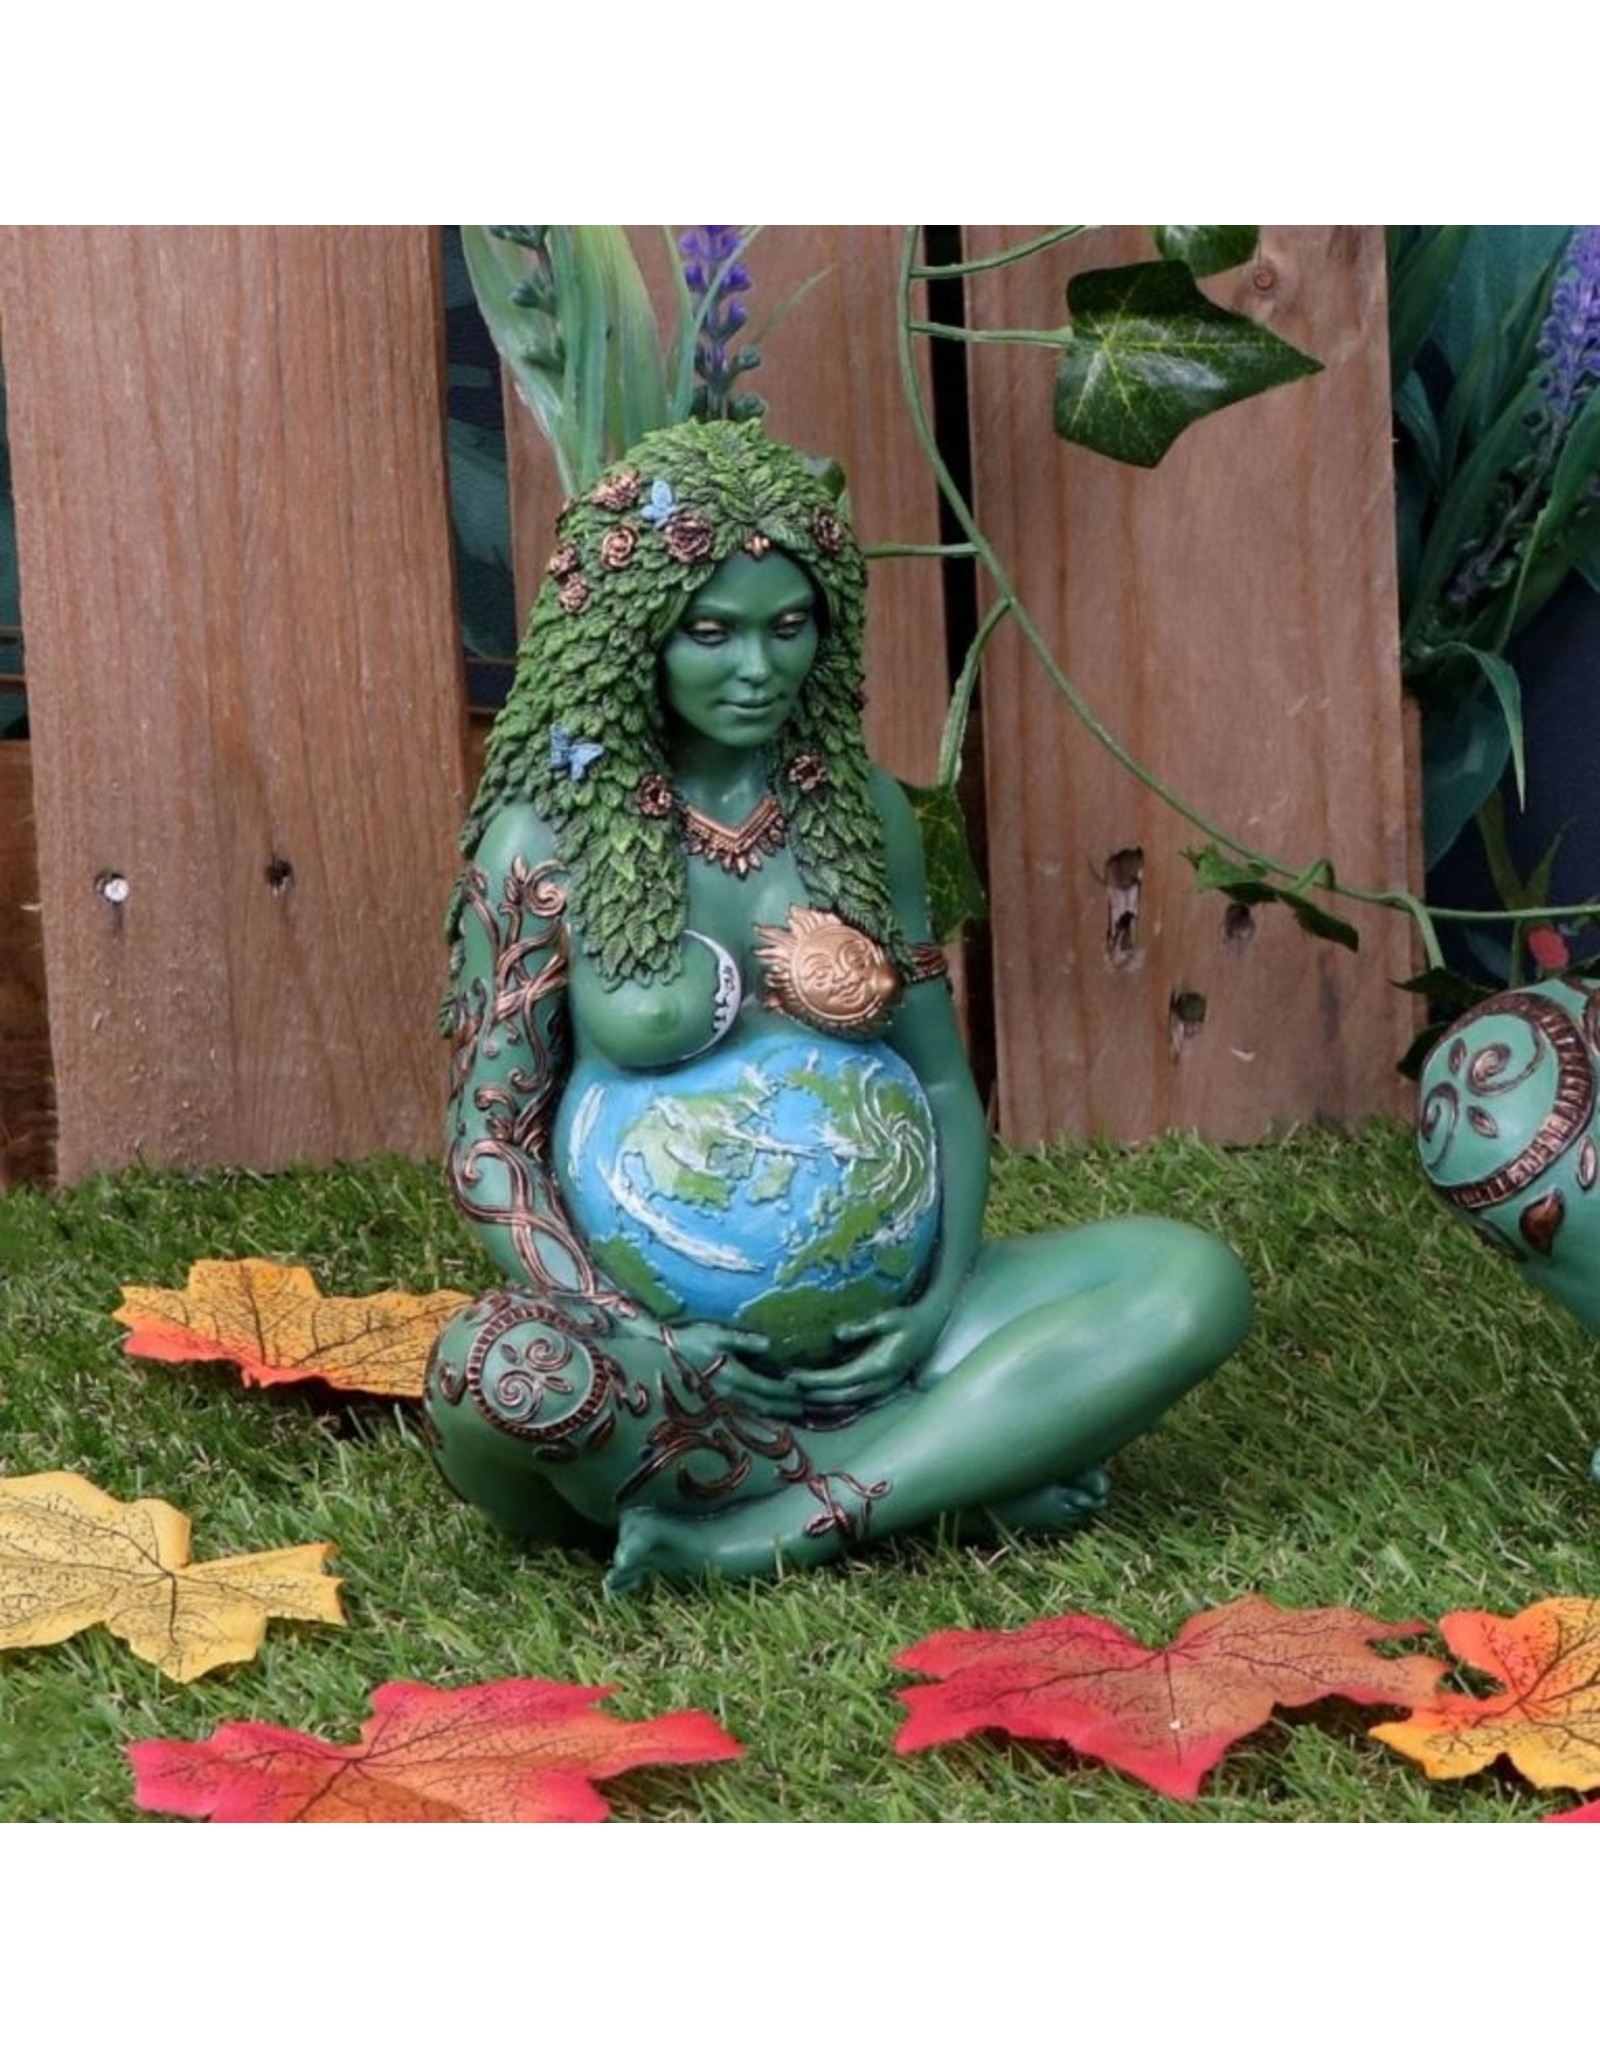 NemesisNow Giftware & Lifestyle - Ethereal Mother Earth Gaia Art Statue Hand-painted  - 17.5cm